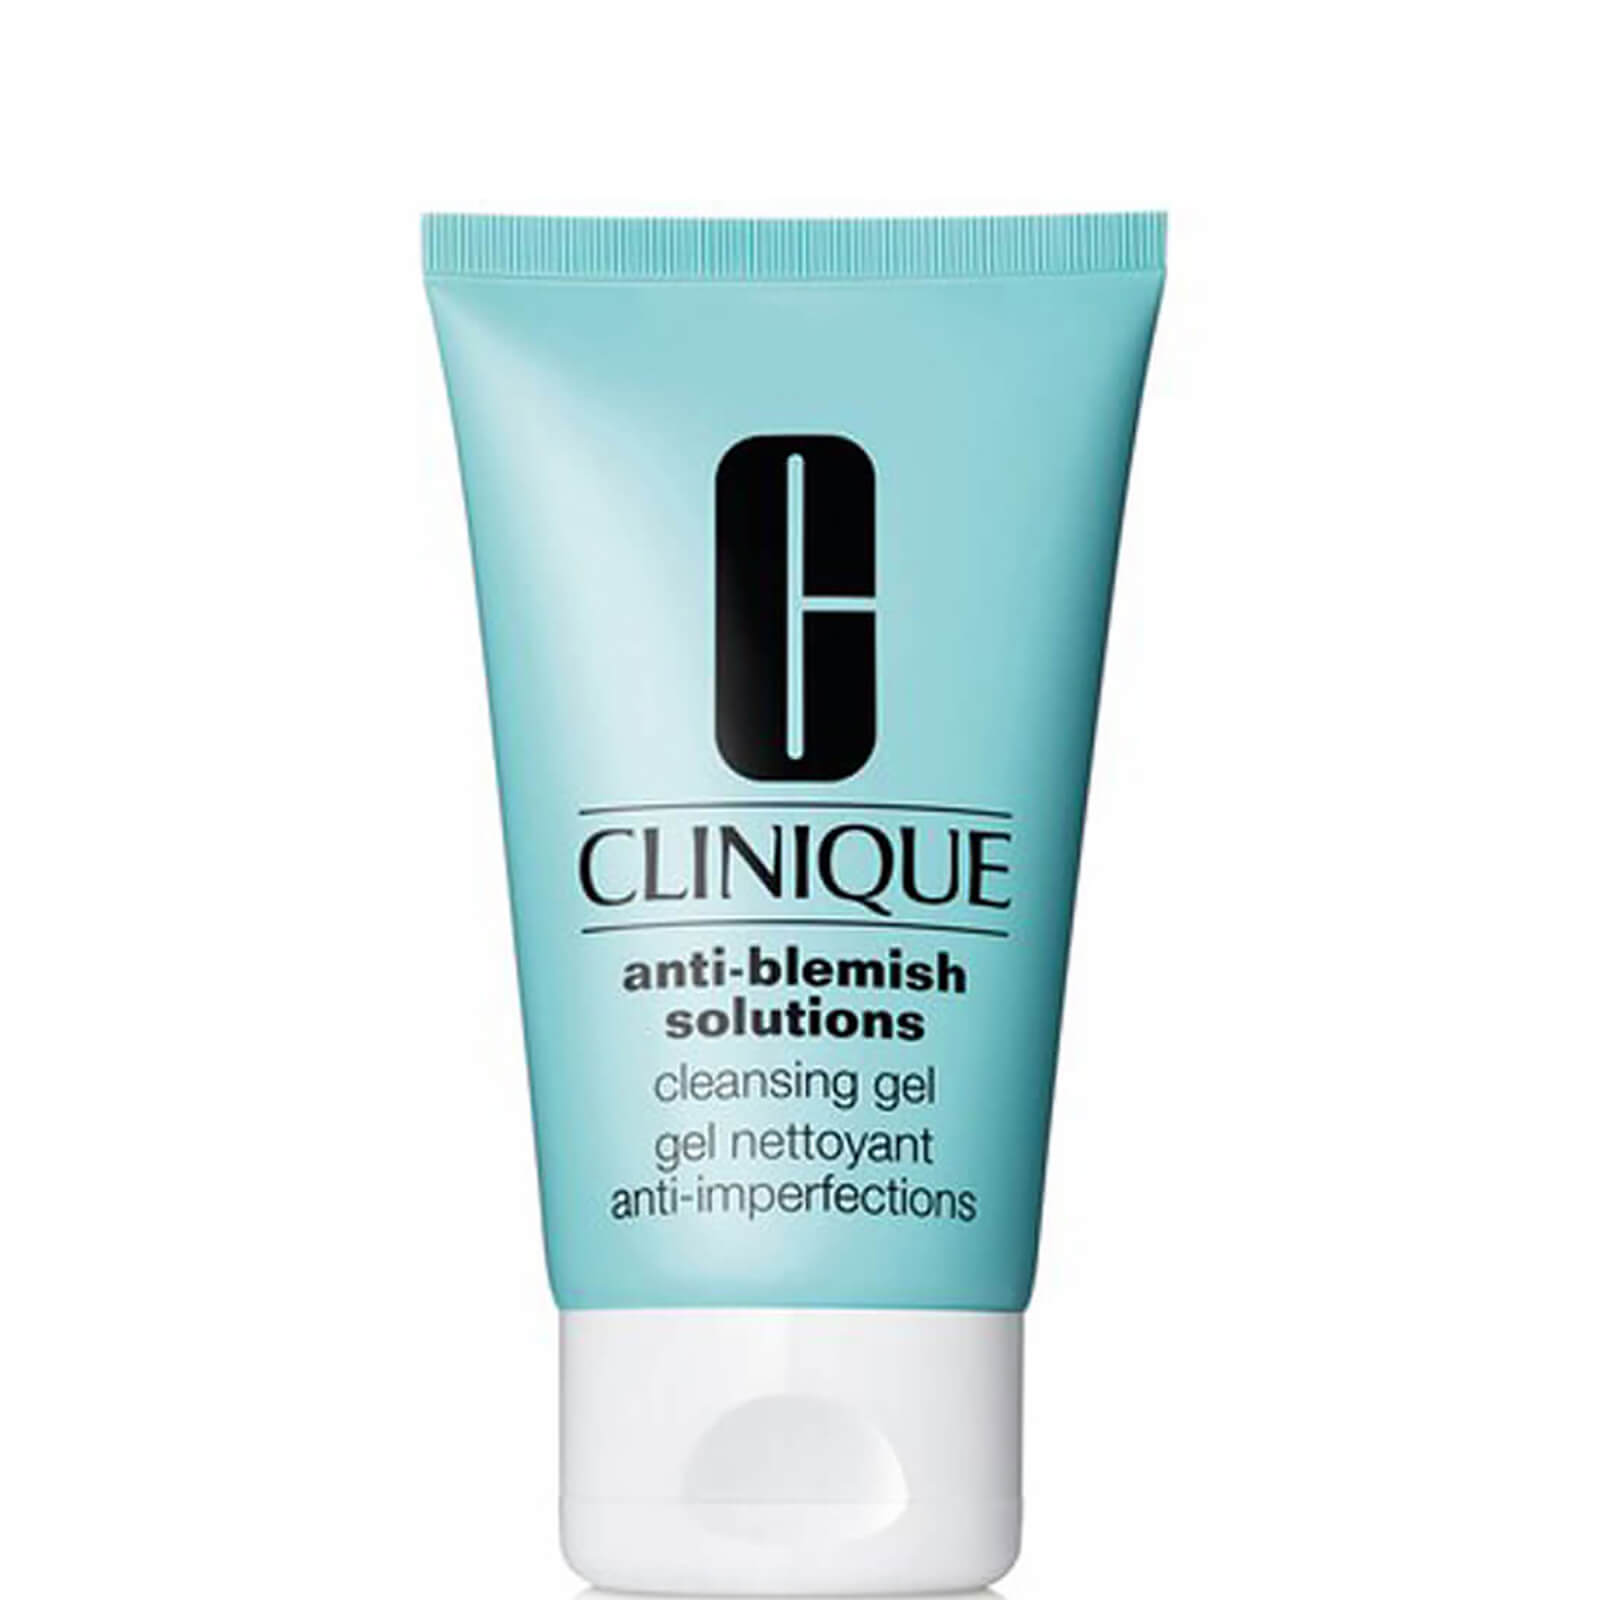 AntiBlemish Solutions Cleansing Gel